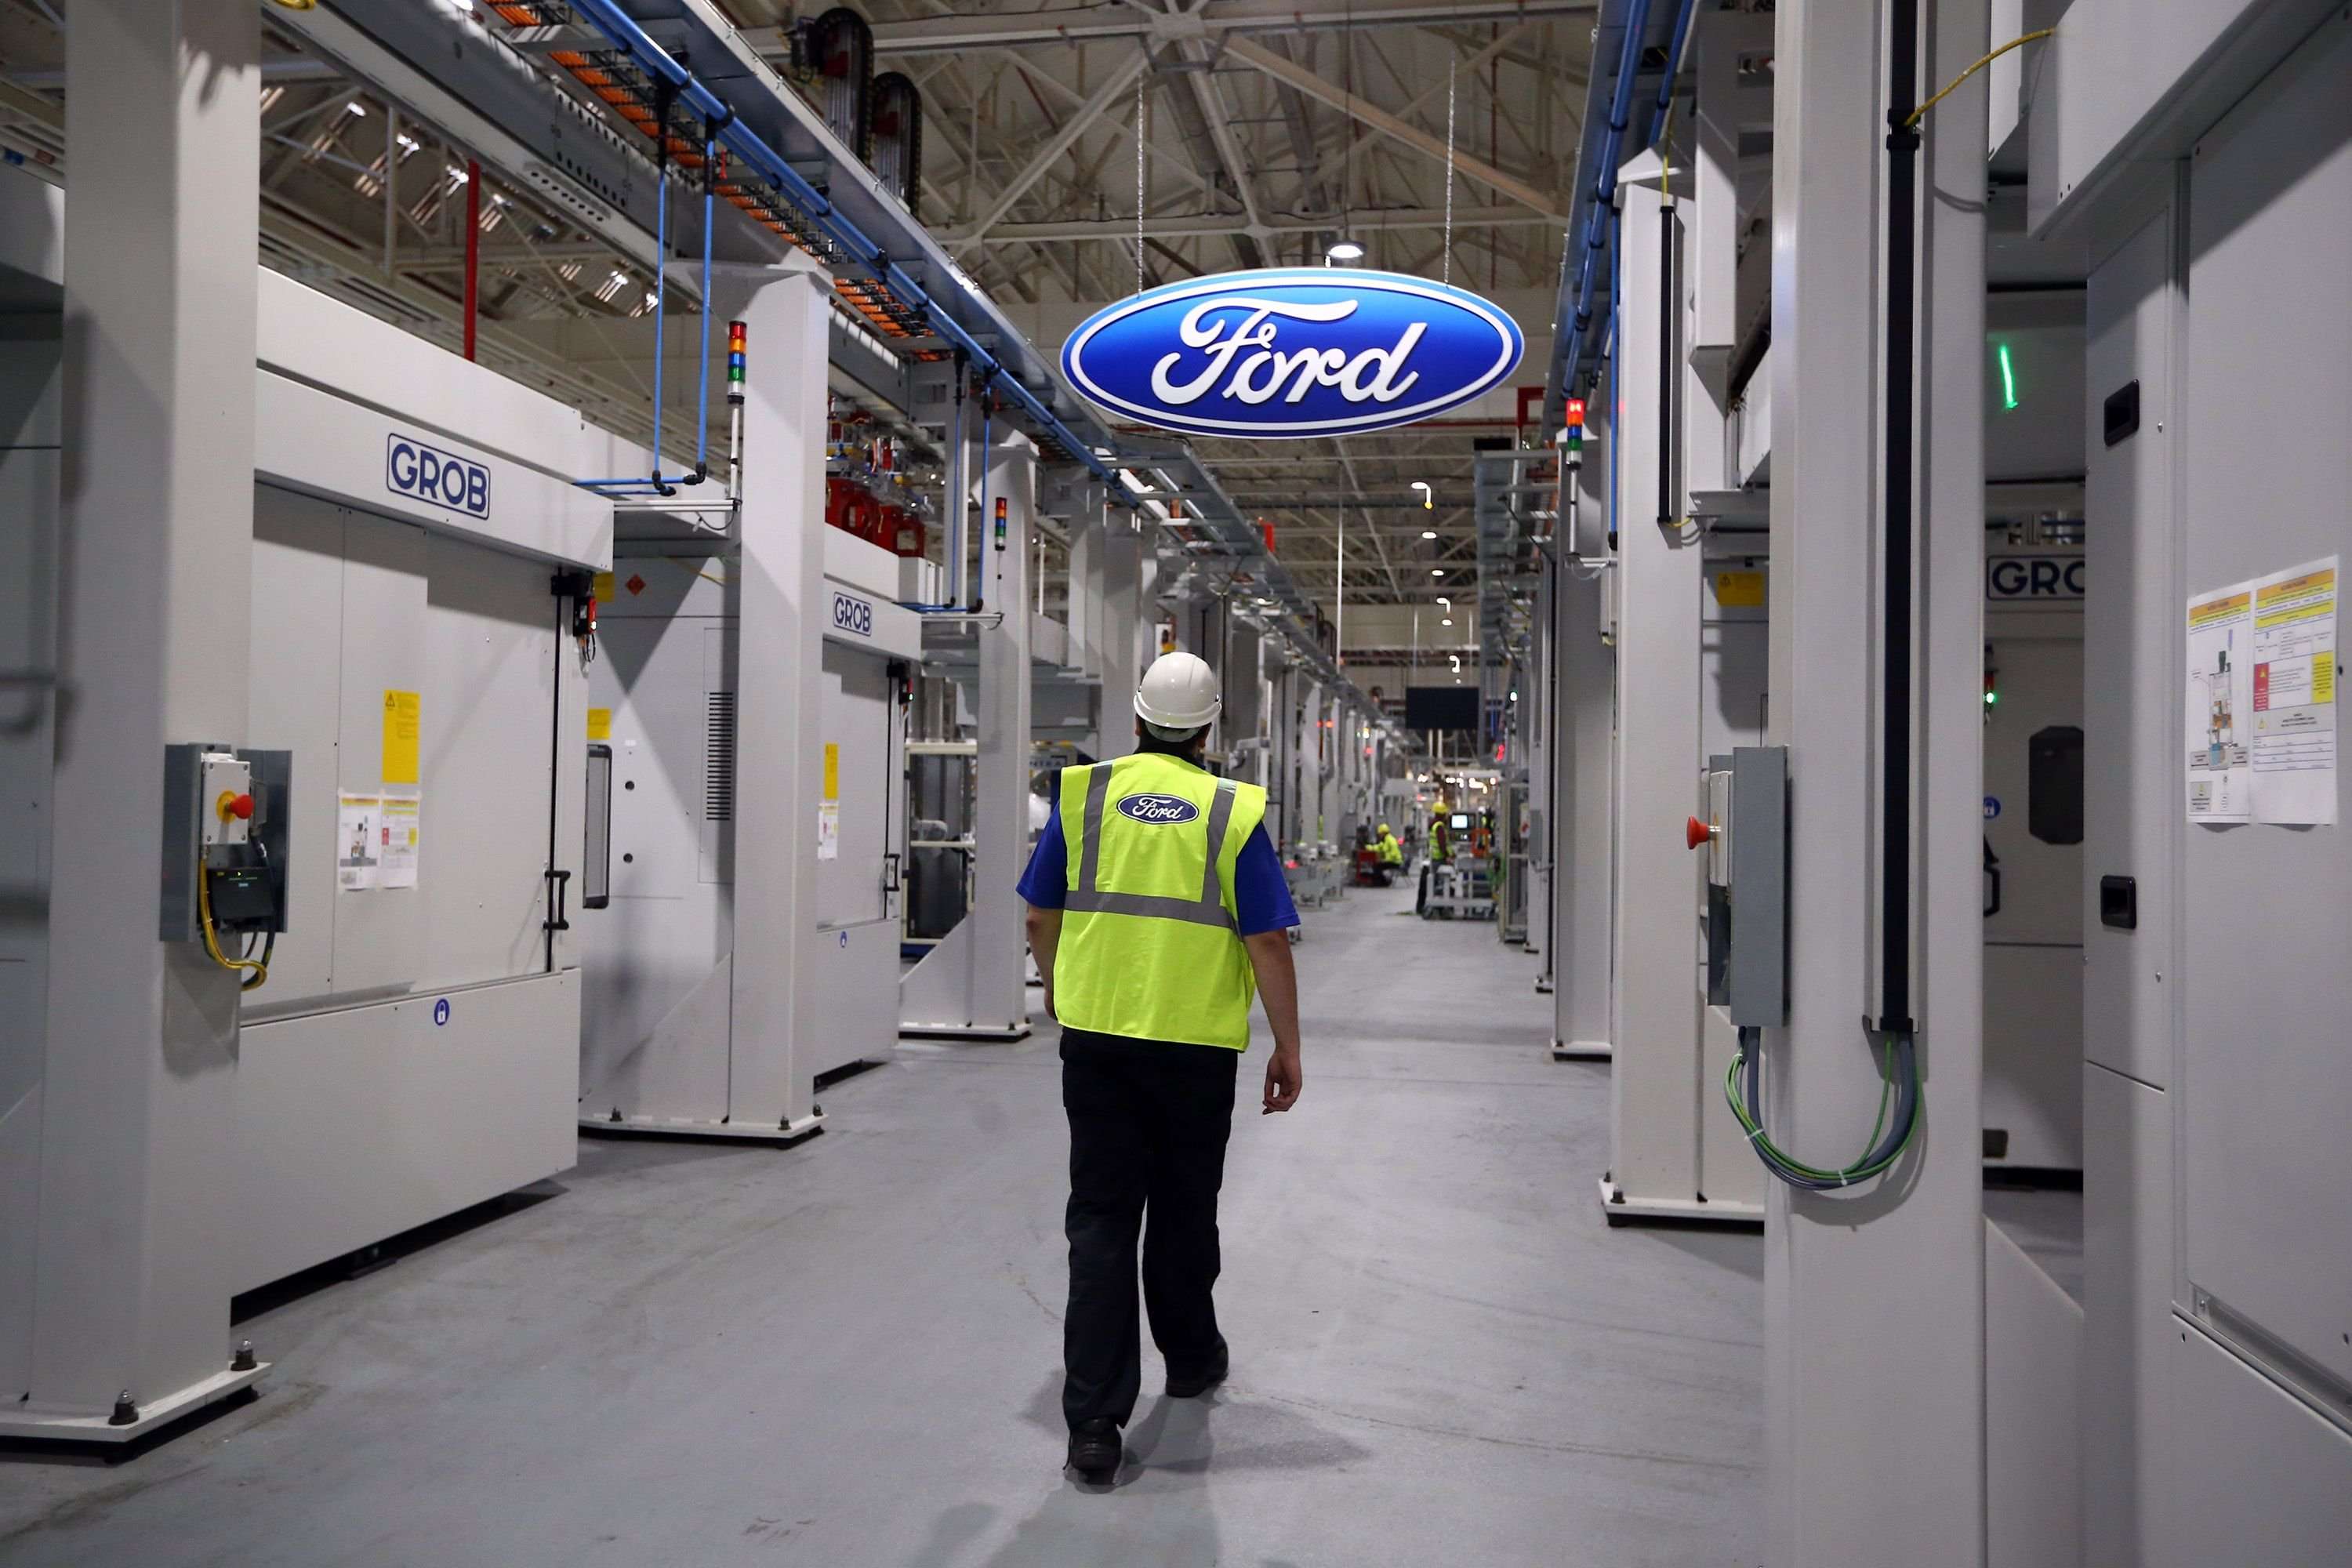 image for Ford Prepares for Mass Layoffs After Losing $1 Billion to Trump's Trade Tariffs, Report Says